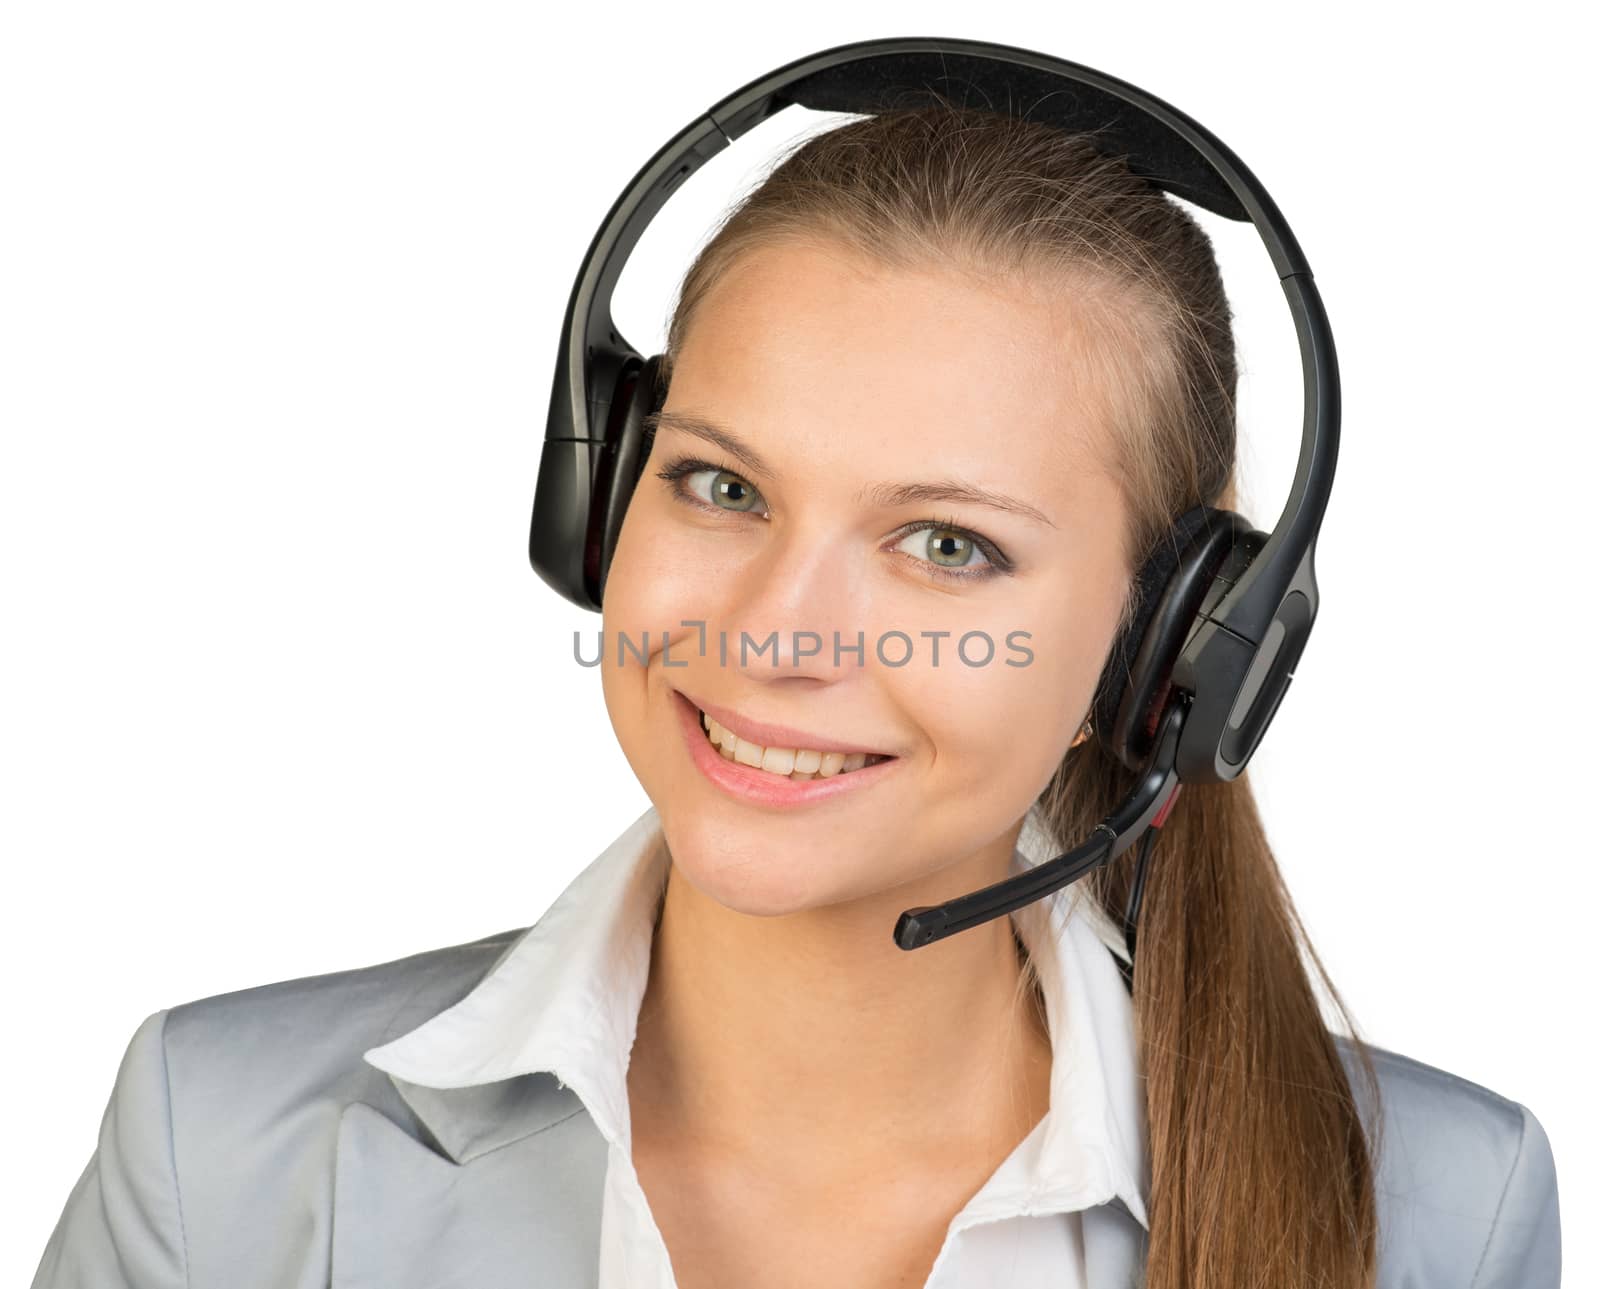 Businesswoman in headset, her head tilted slightly to the side, looking at camera, smiling. Isolated over white background